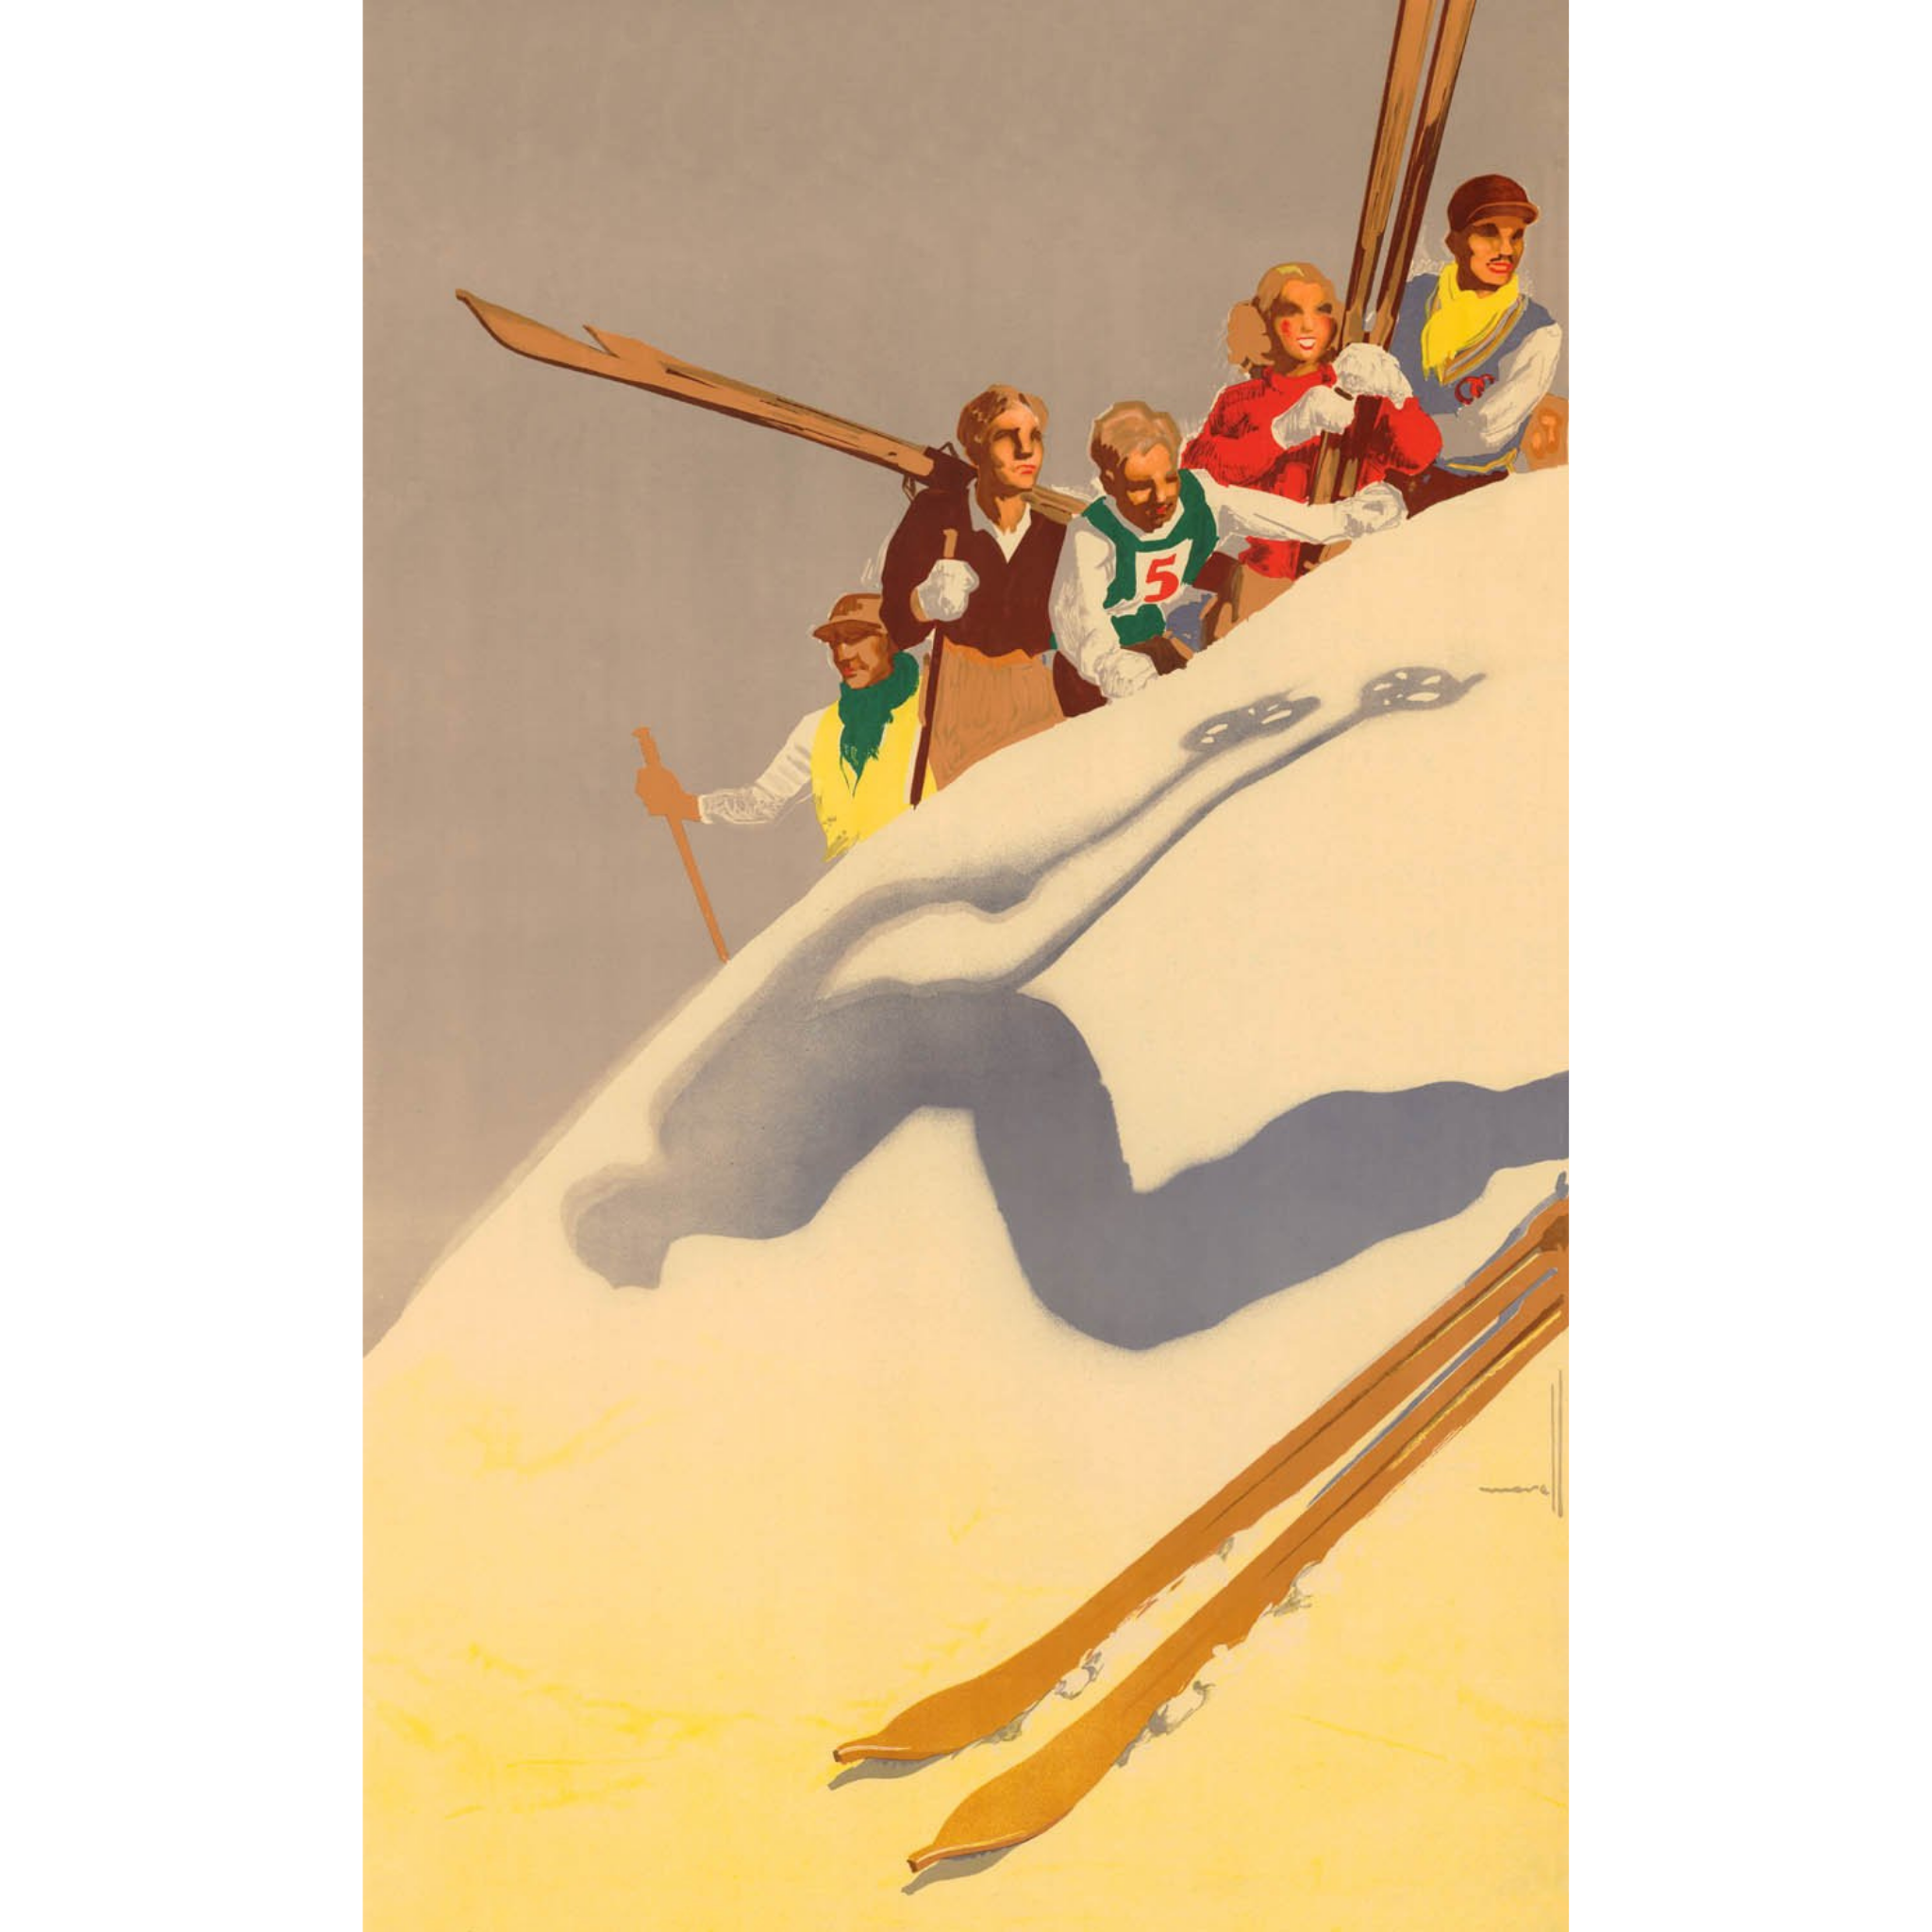 Shadow of Skier - ca. 1935 Lithograph